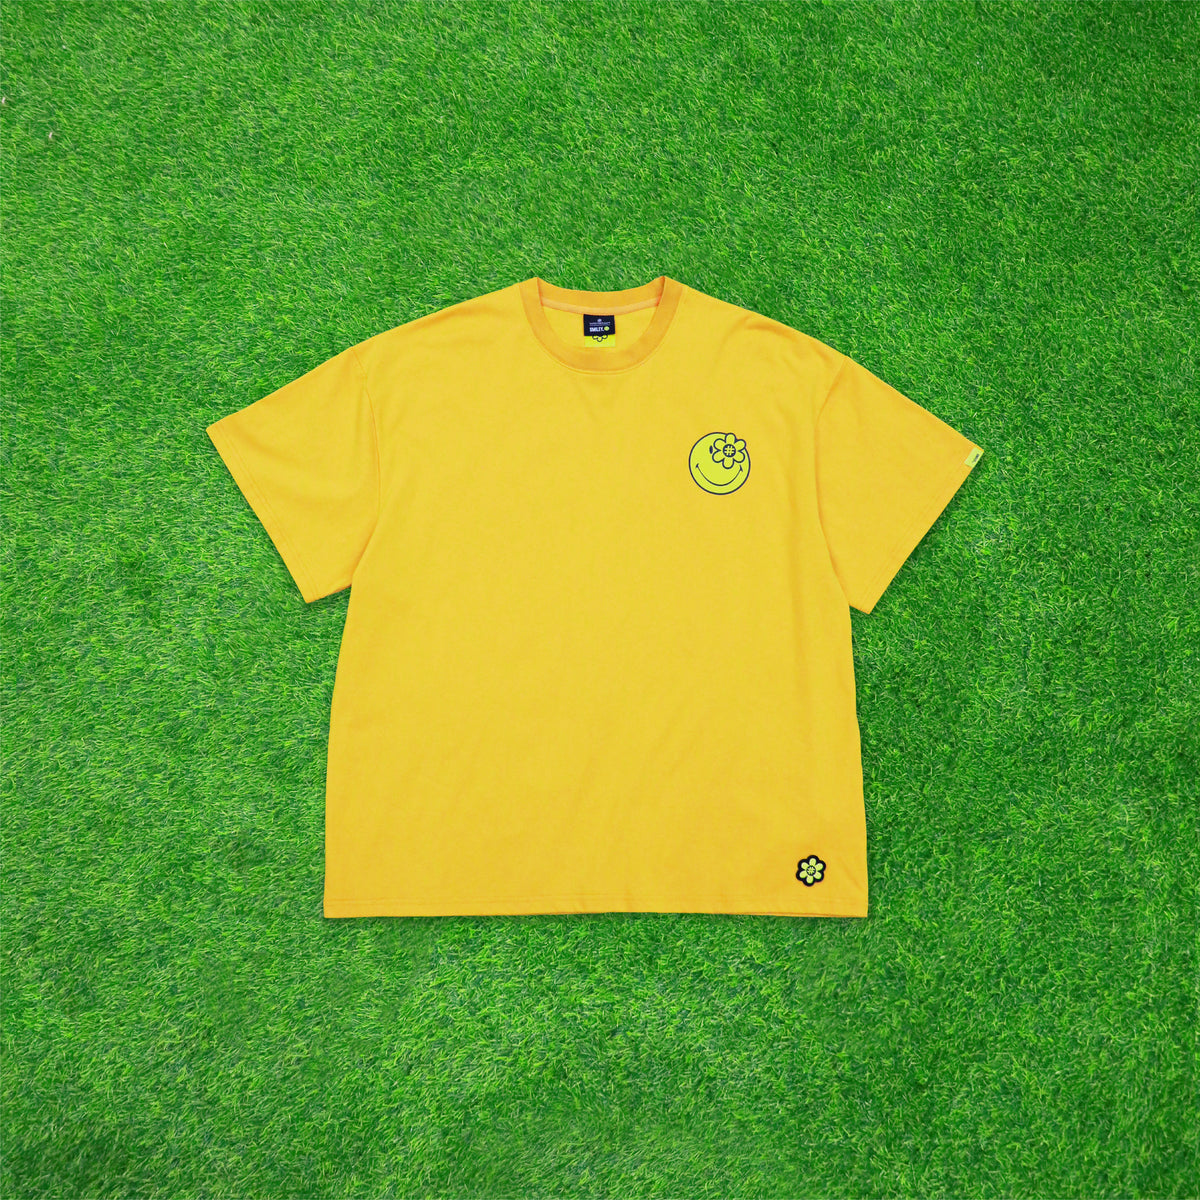 BEAM TSHIRT | ORANGE, Short sleeve, Oversized Fit, Ribbed crewneck, Yellow woven flag logo at the left sleeve, Collaboration with Smiley, Color: Orange, Material: 100% Cotton